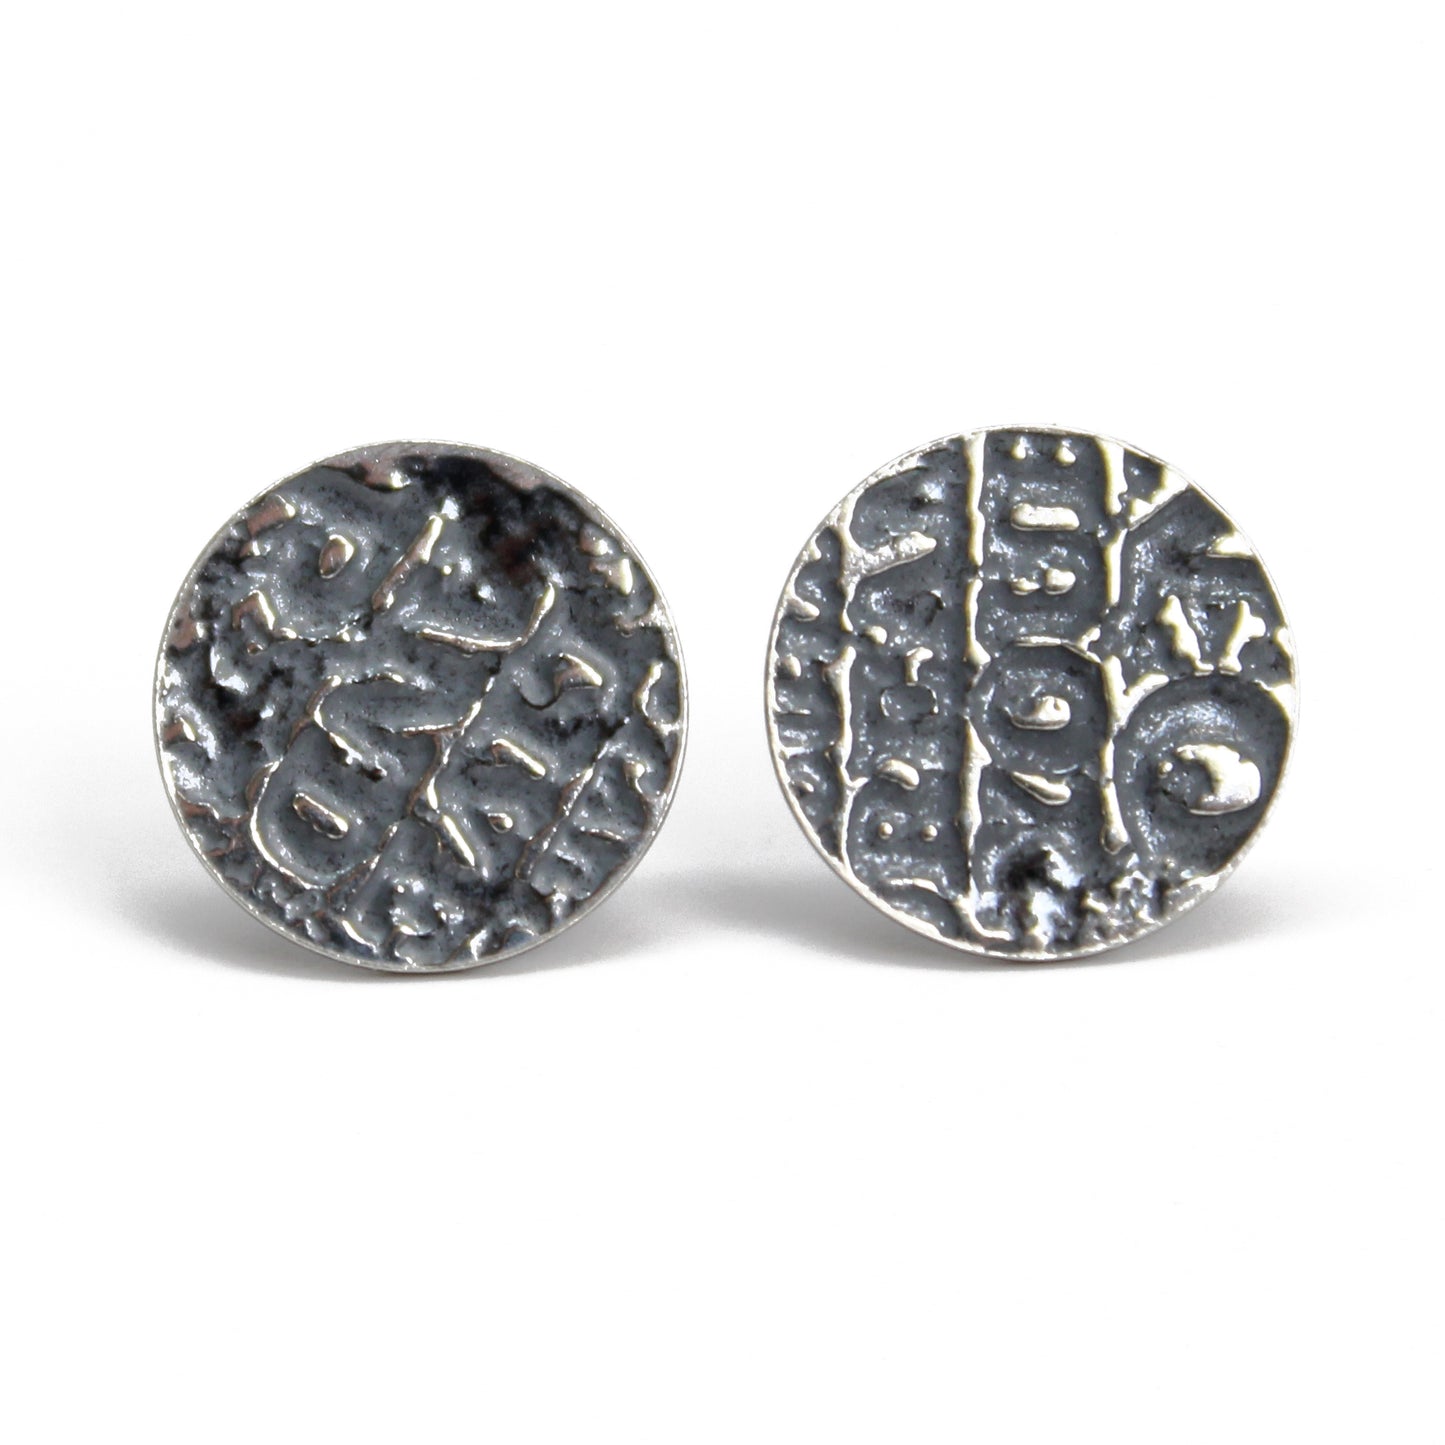 Rustic Etched Sterling Silver Round Flat Earrings 9mm